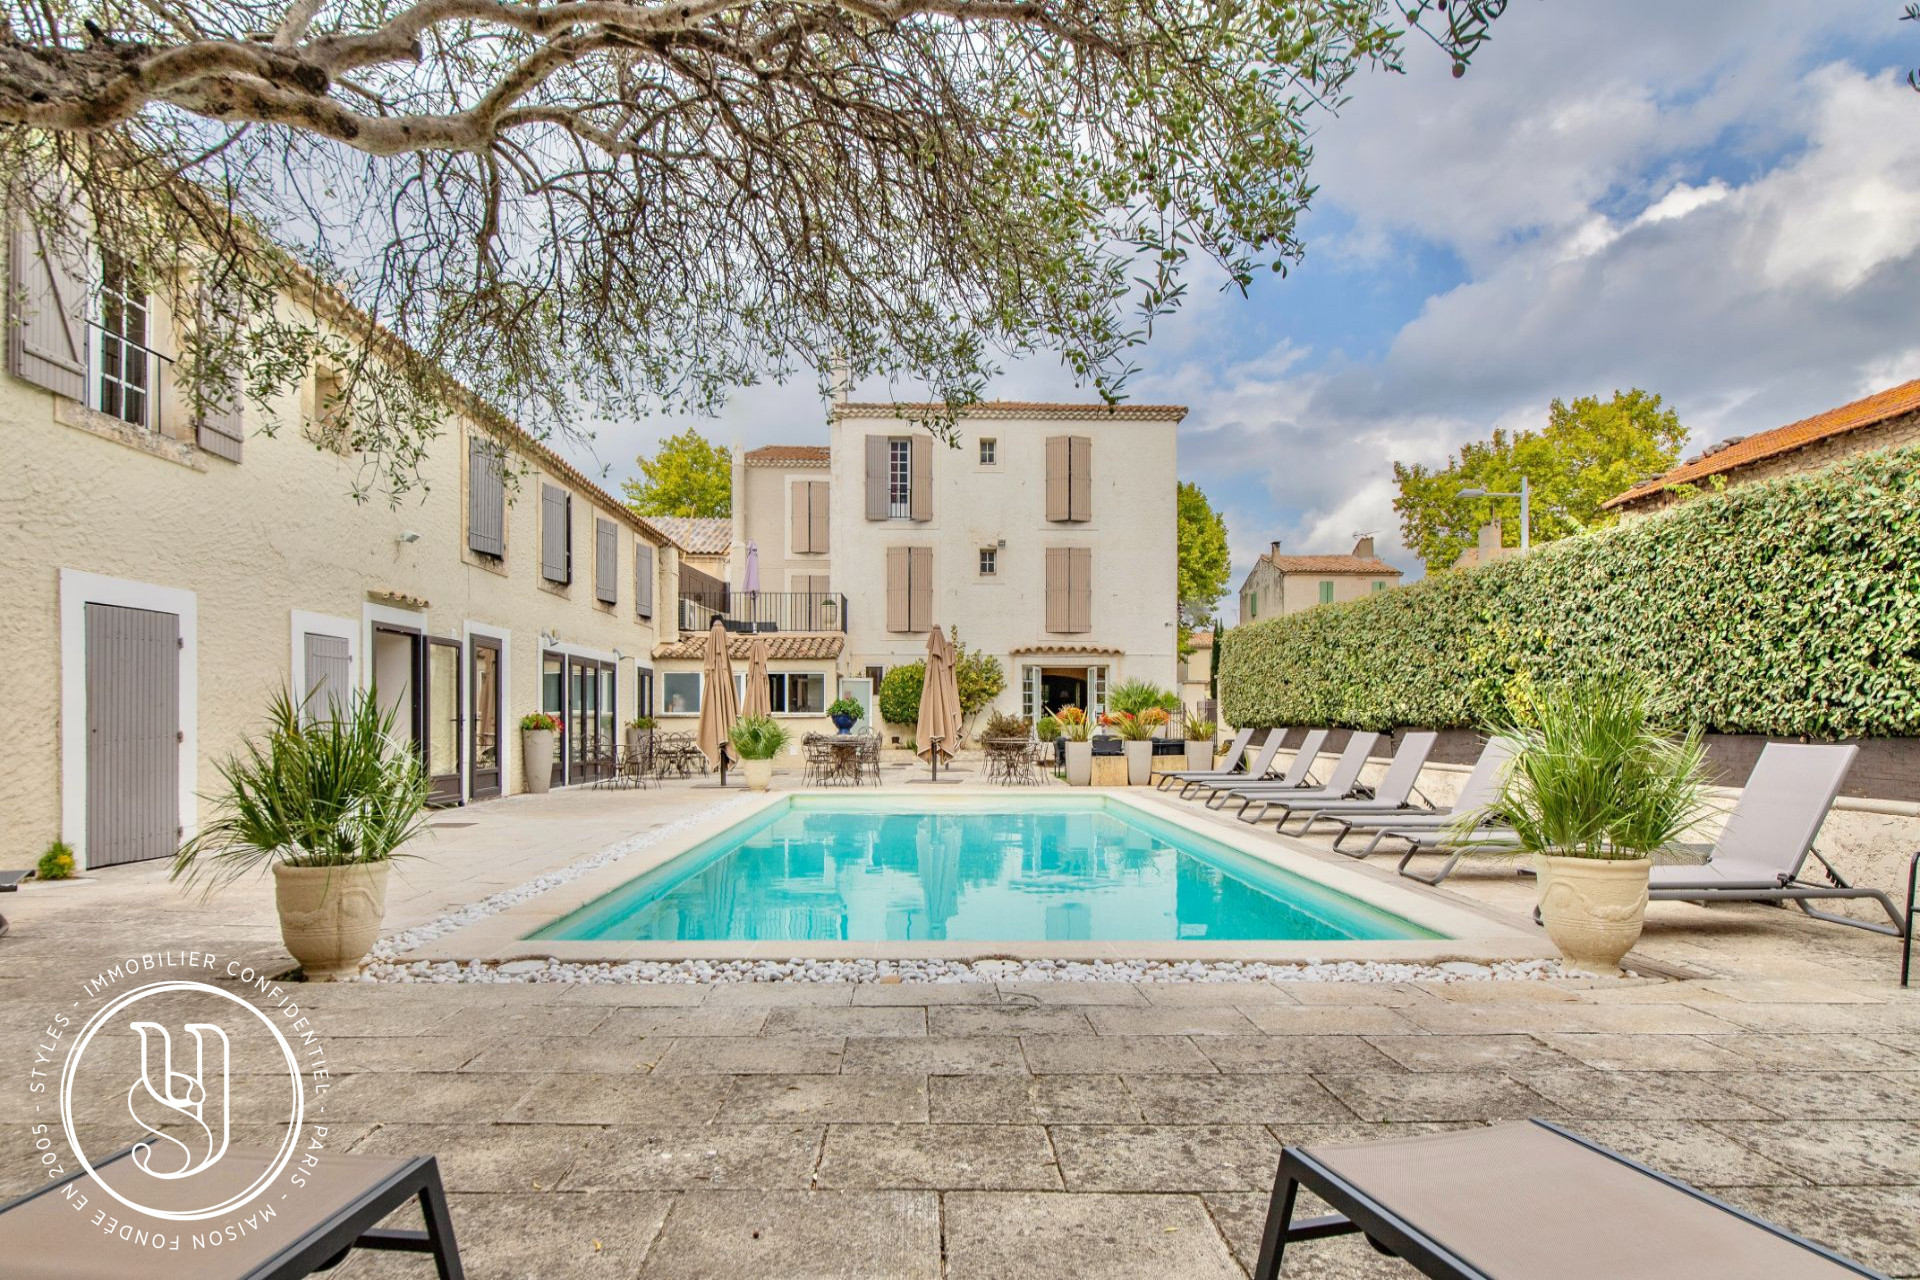 Saint-Rémy-de-Provence - in a sought-after village, right in the center, a vast mansion - image 6